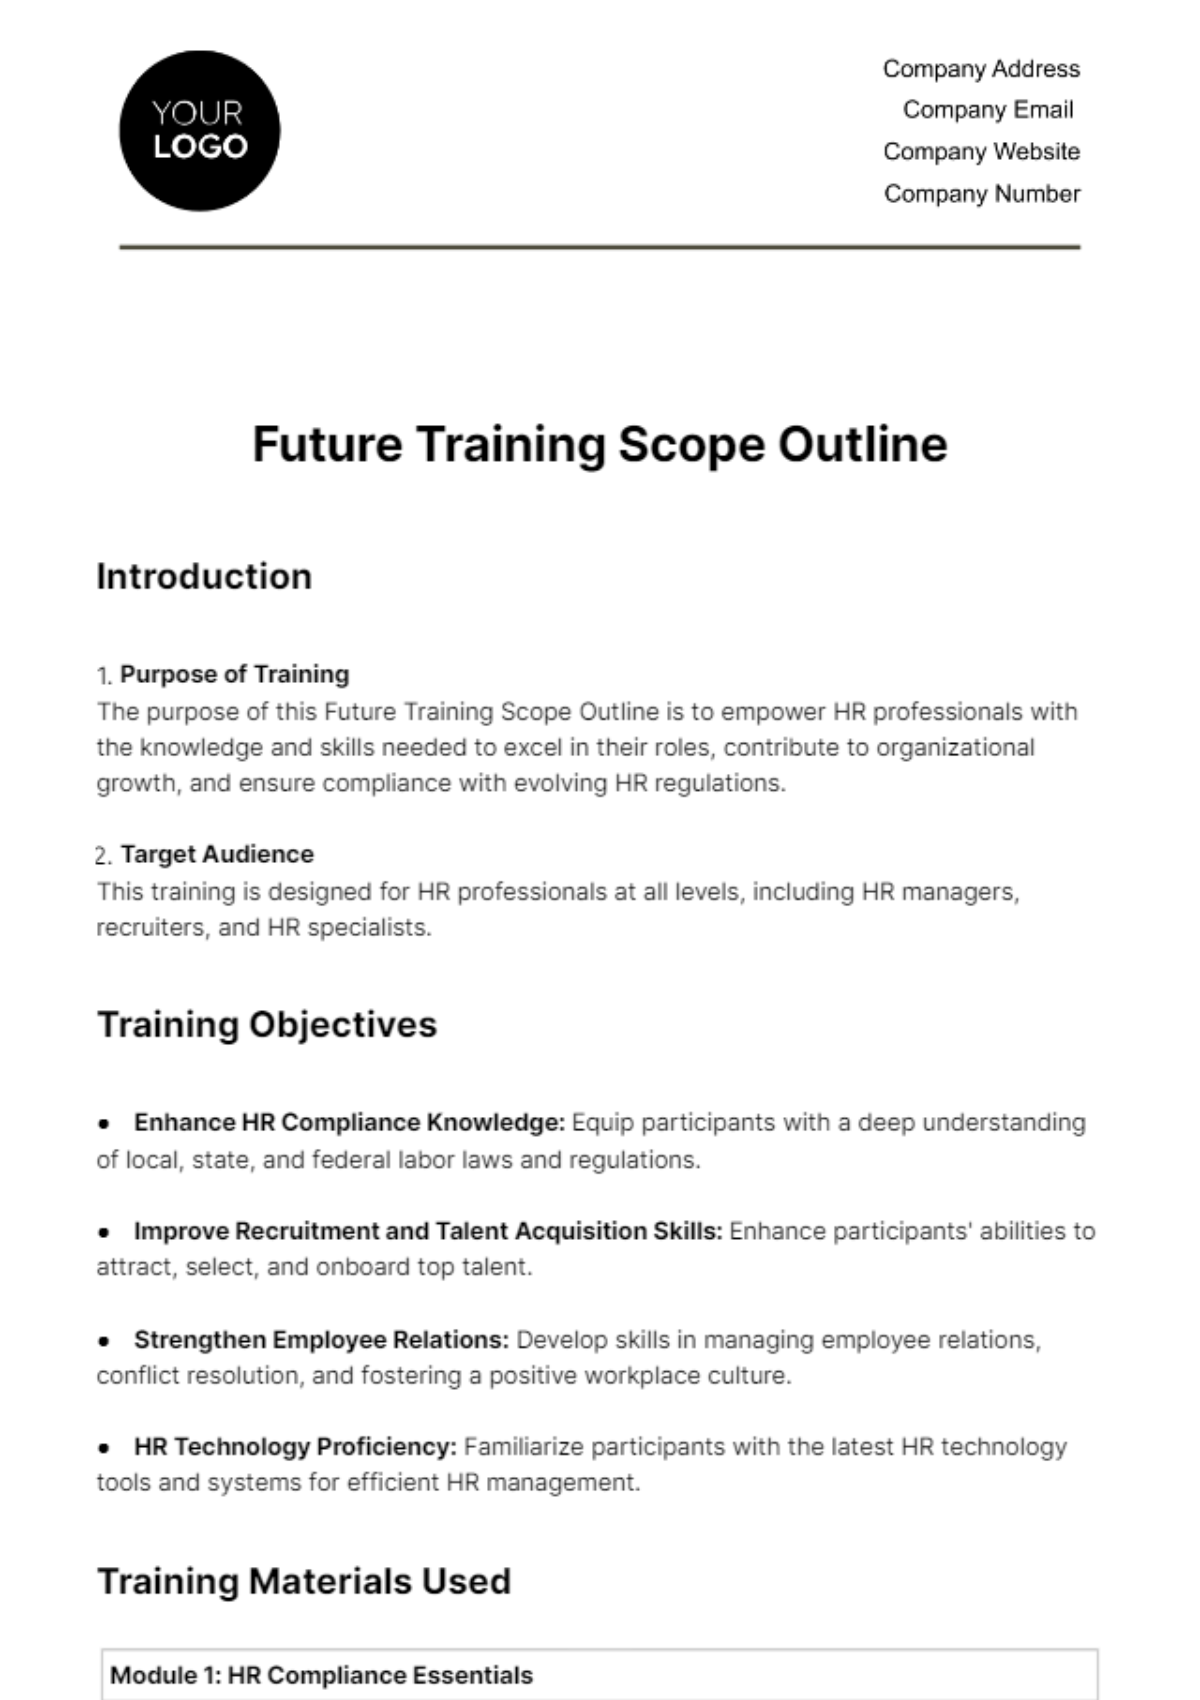 Free Future Training Scope Outline HR Template